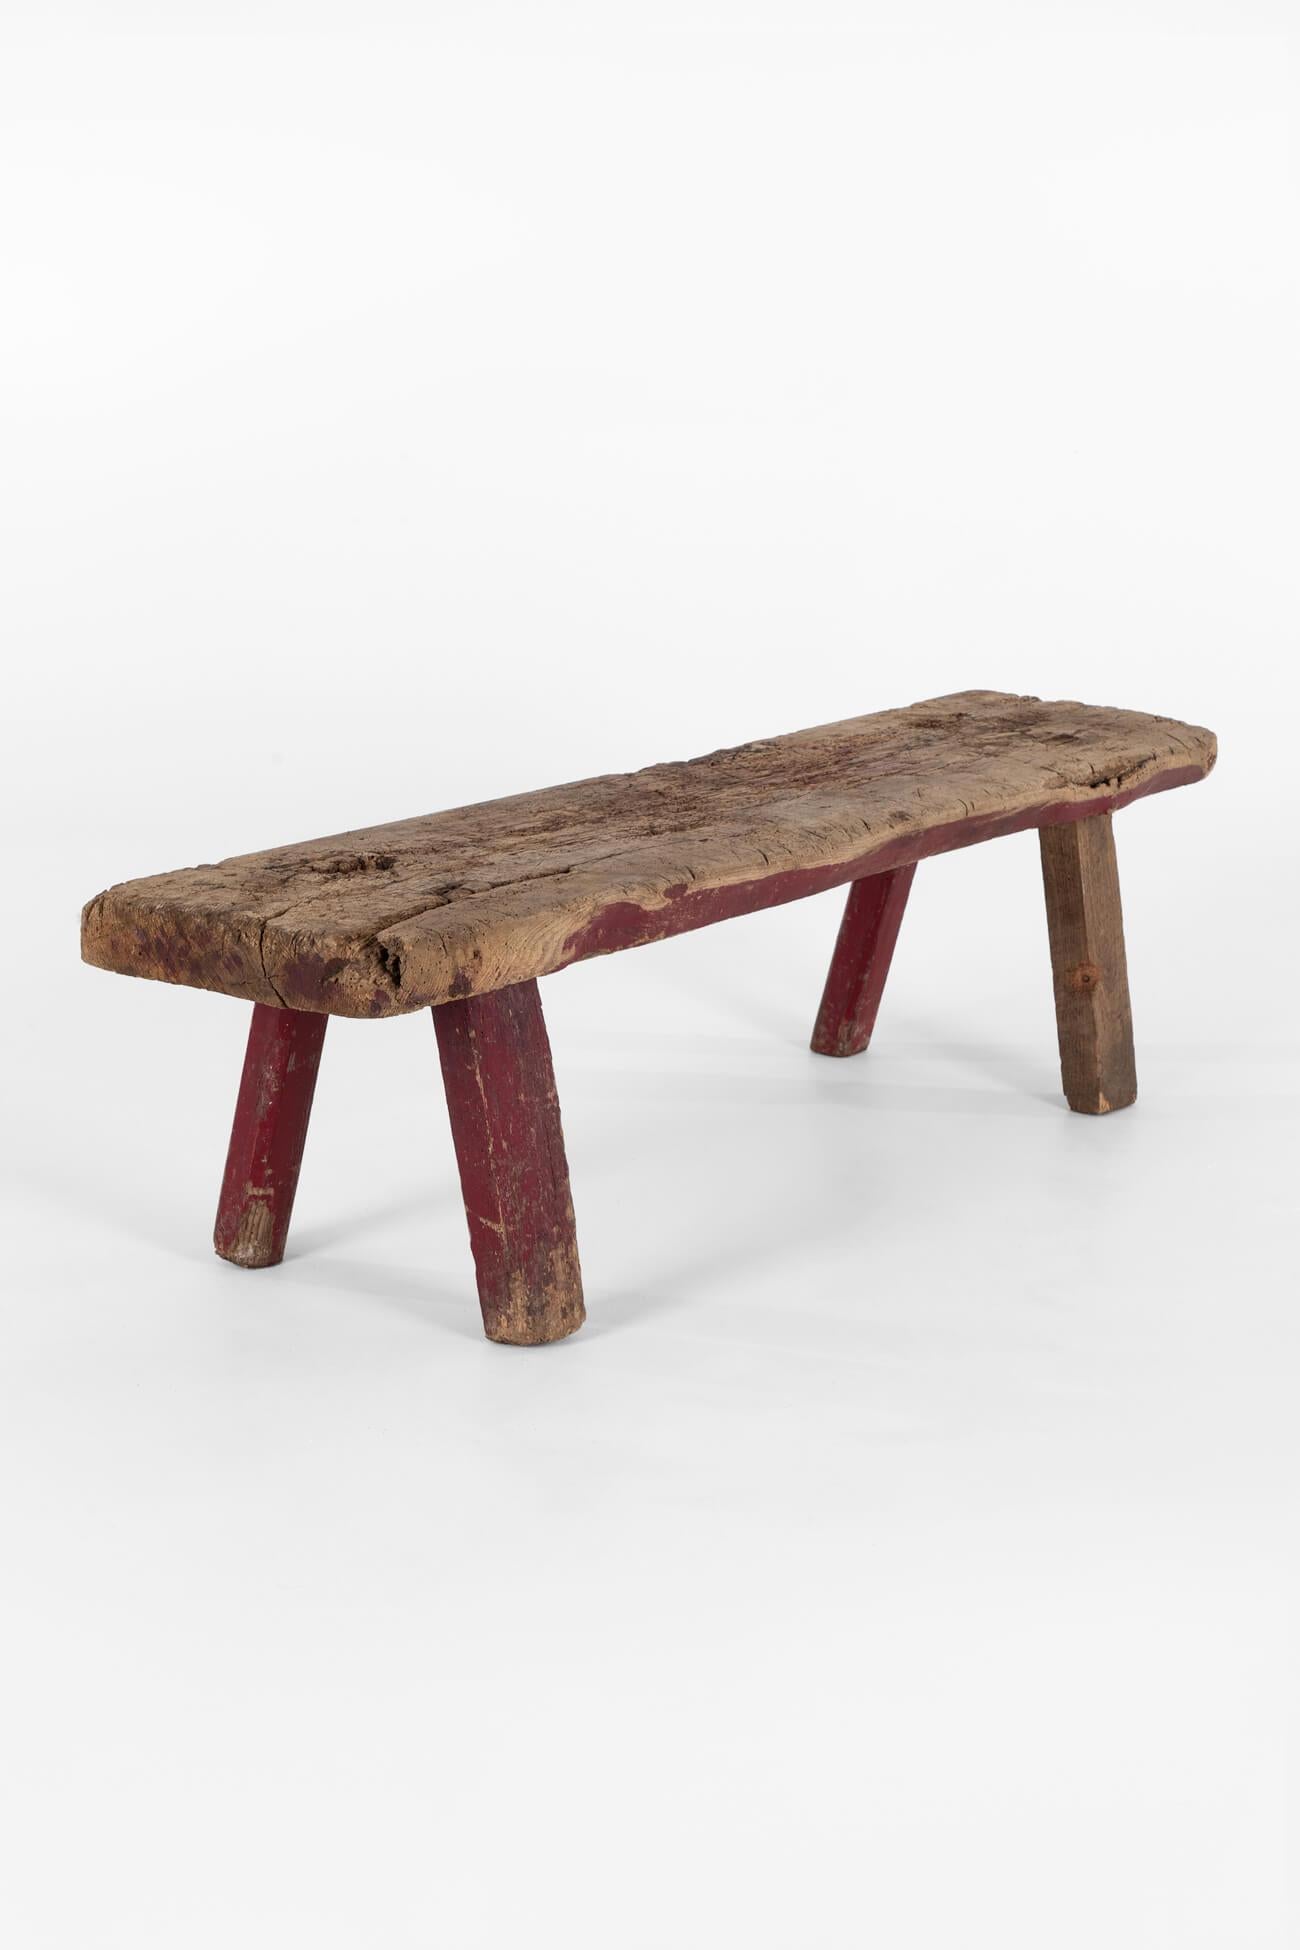 A weathered Welsh early 19th-century pig bench in elm.

Large single slab elm top over four square cut supports.

In original condition displaying heavy use and patination throughout with remnants of burgundy paint to the legs and sides.

Strong and